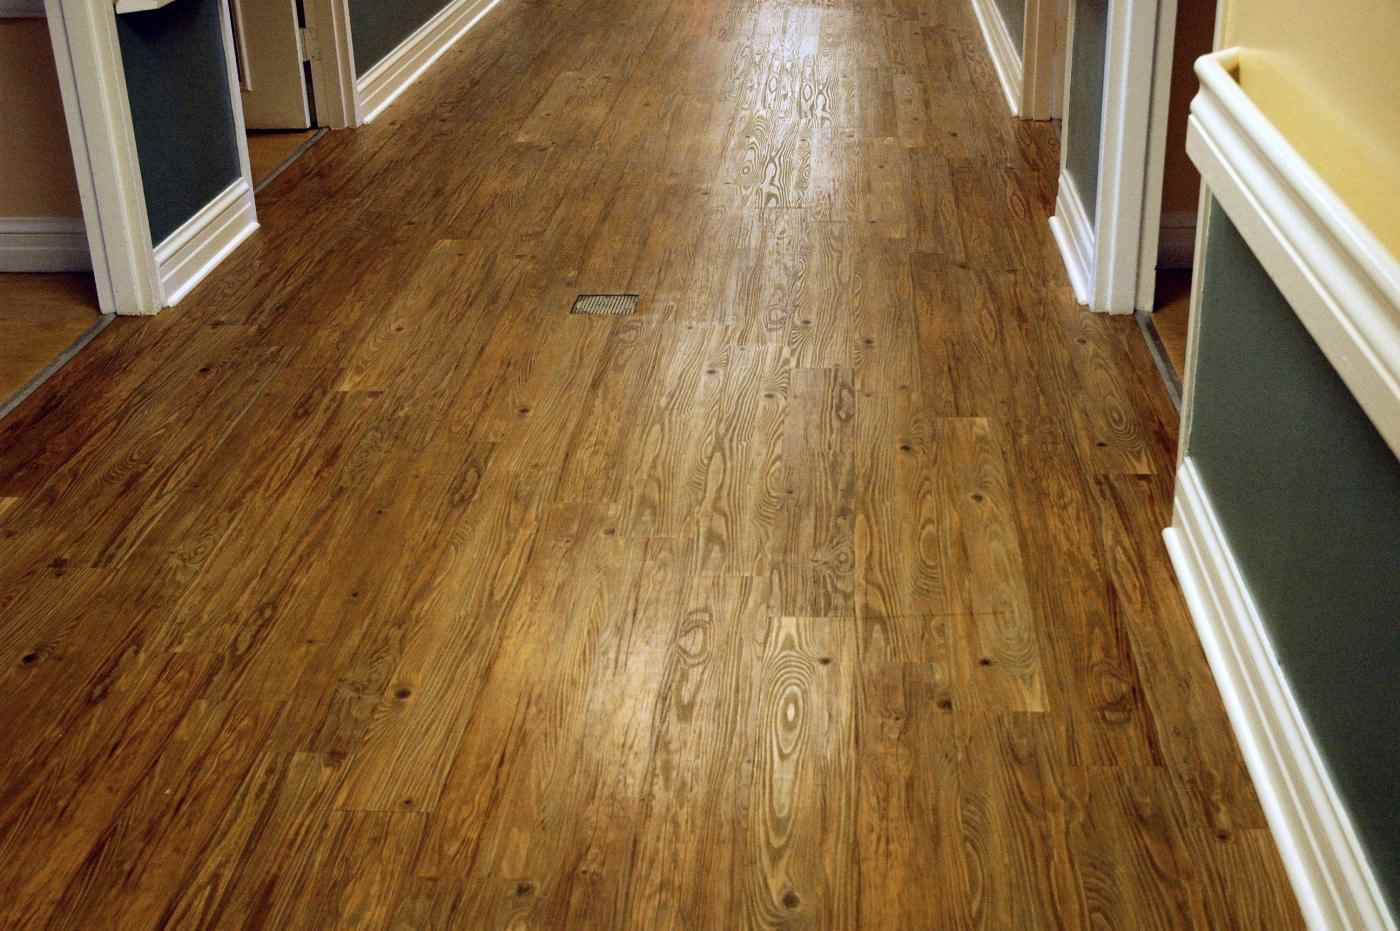 Contemporary Entryway Best Inspiring Contemporary Entryway Applying Wooden Best Laminate Flooring Tile Design Combined With Dark Green Also White Wall Paint Color Interior Design Best Laminate Flooring For Your House